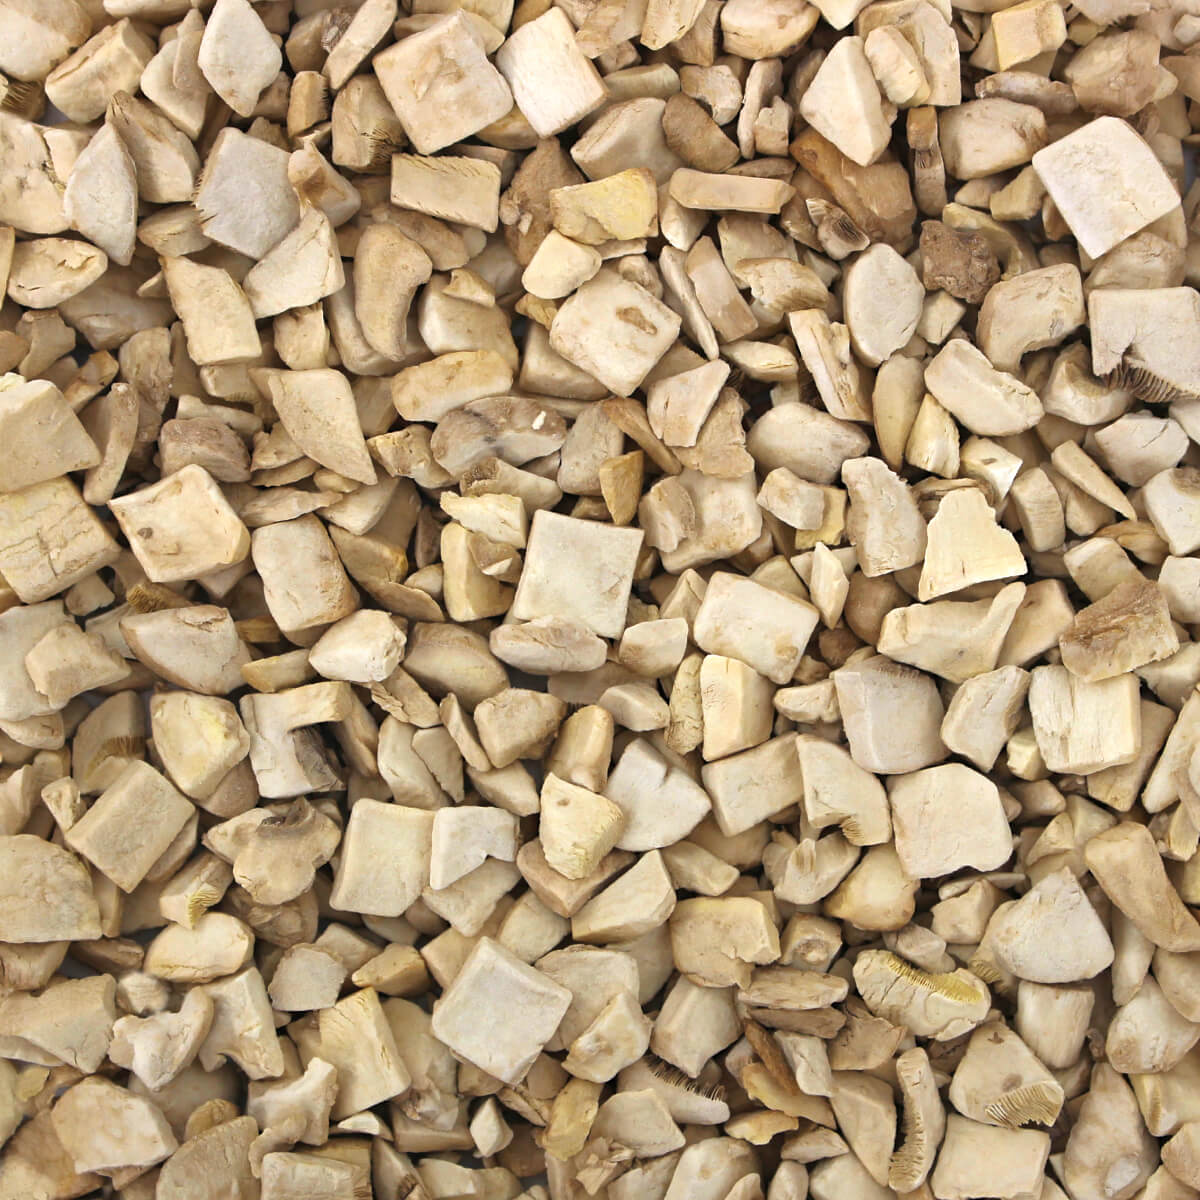 A pile of wood pieces.